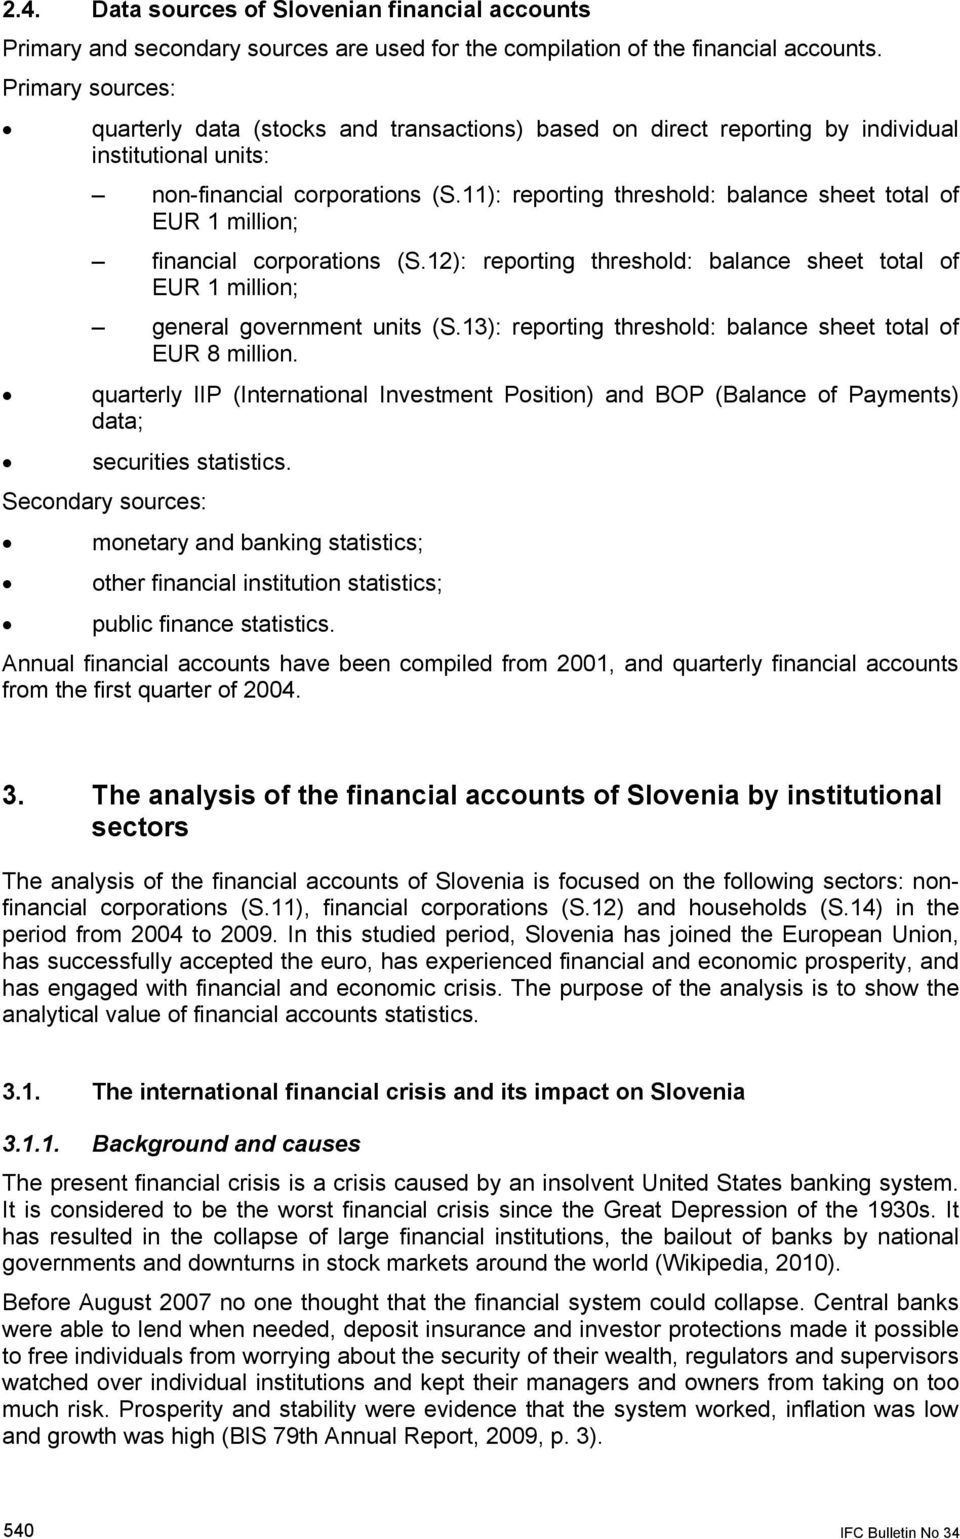 11): reporting threshold: balance sheet total of EUR 1 million; financial corporations (S.12): reporting threshold: balance sheet total of EUR 1 million; general government units (S.